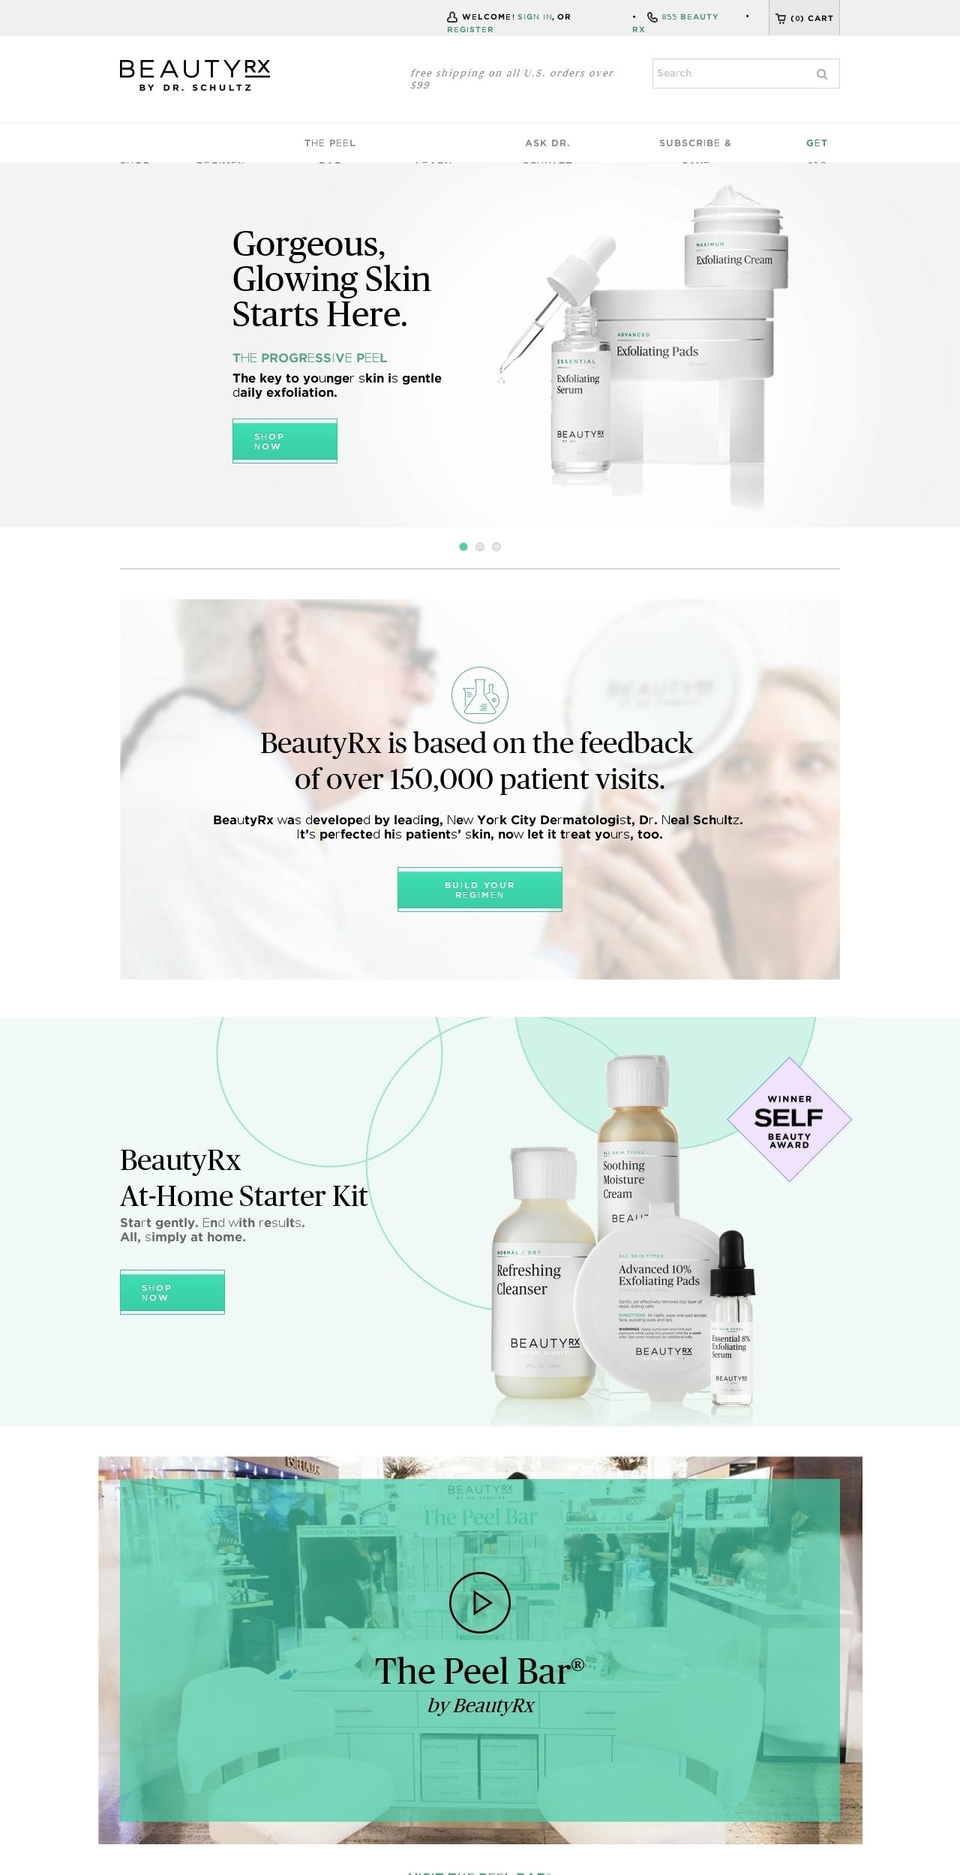 [Mob-20-Feb-18] Beauty RX [BR-248] Shopify theme site example beautyrx.tv